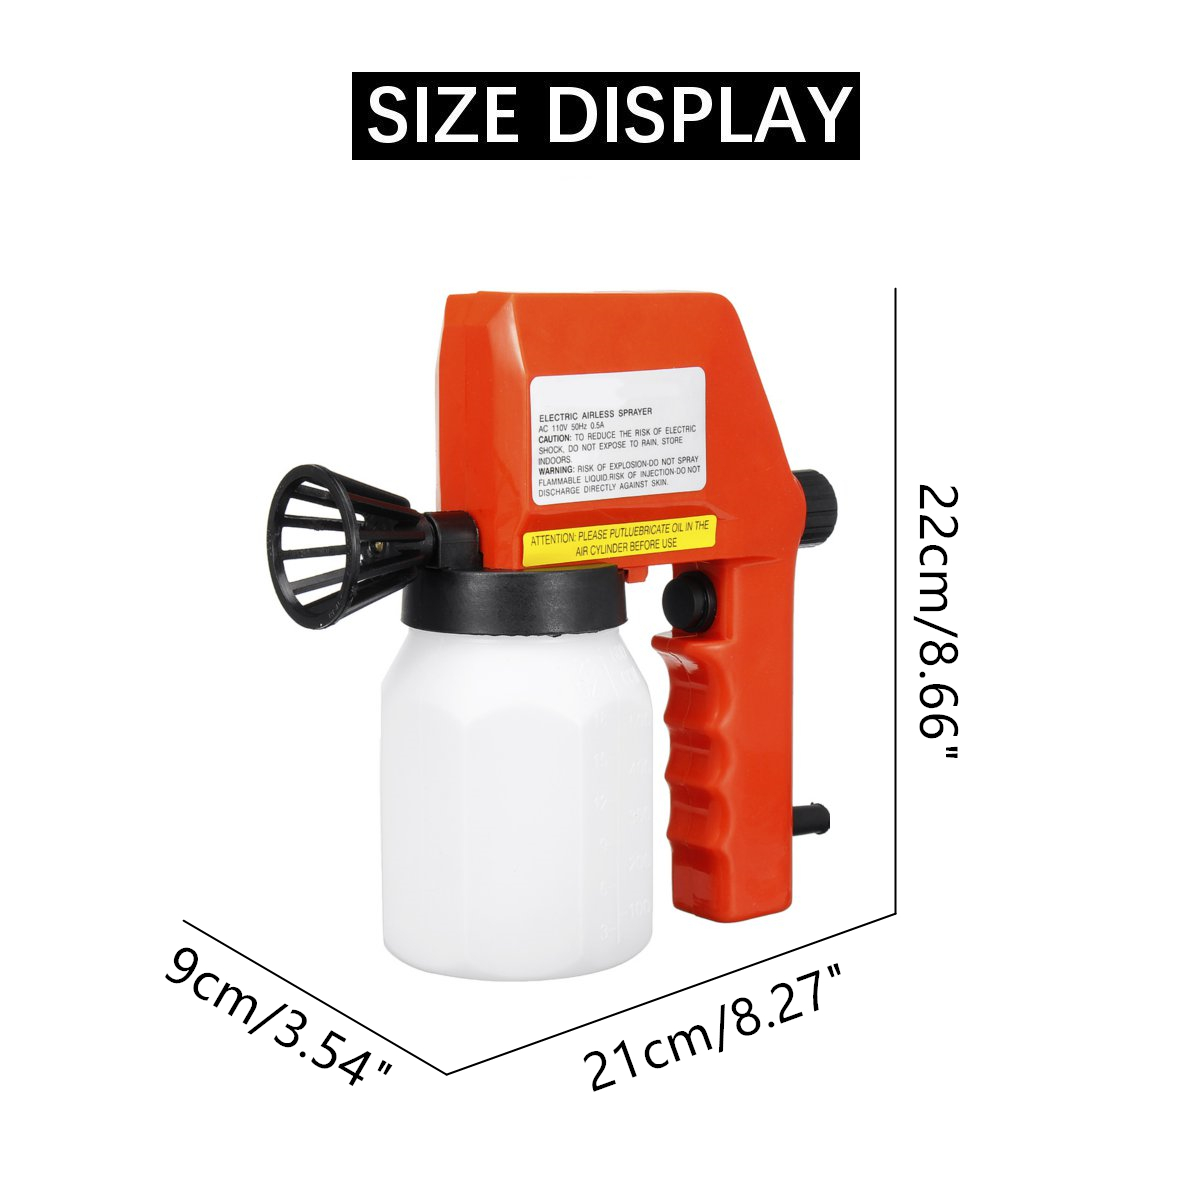 Electrical-Spray-PG-350-600ML-220V-08mm-Nozzle-Paint-Sprayer-Wall-Decorative-Painting-Blender-Paint--1587275-6